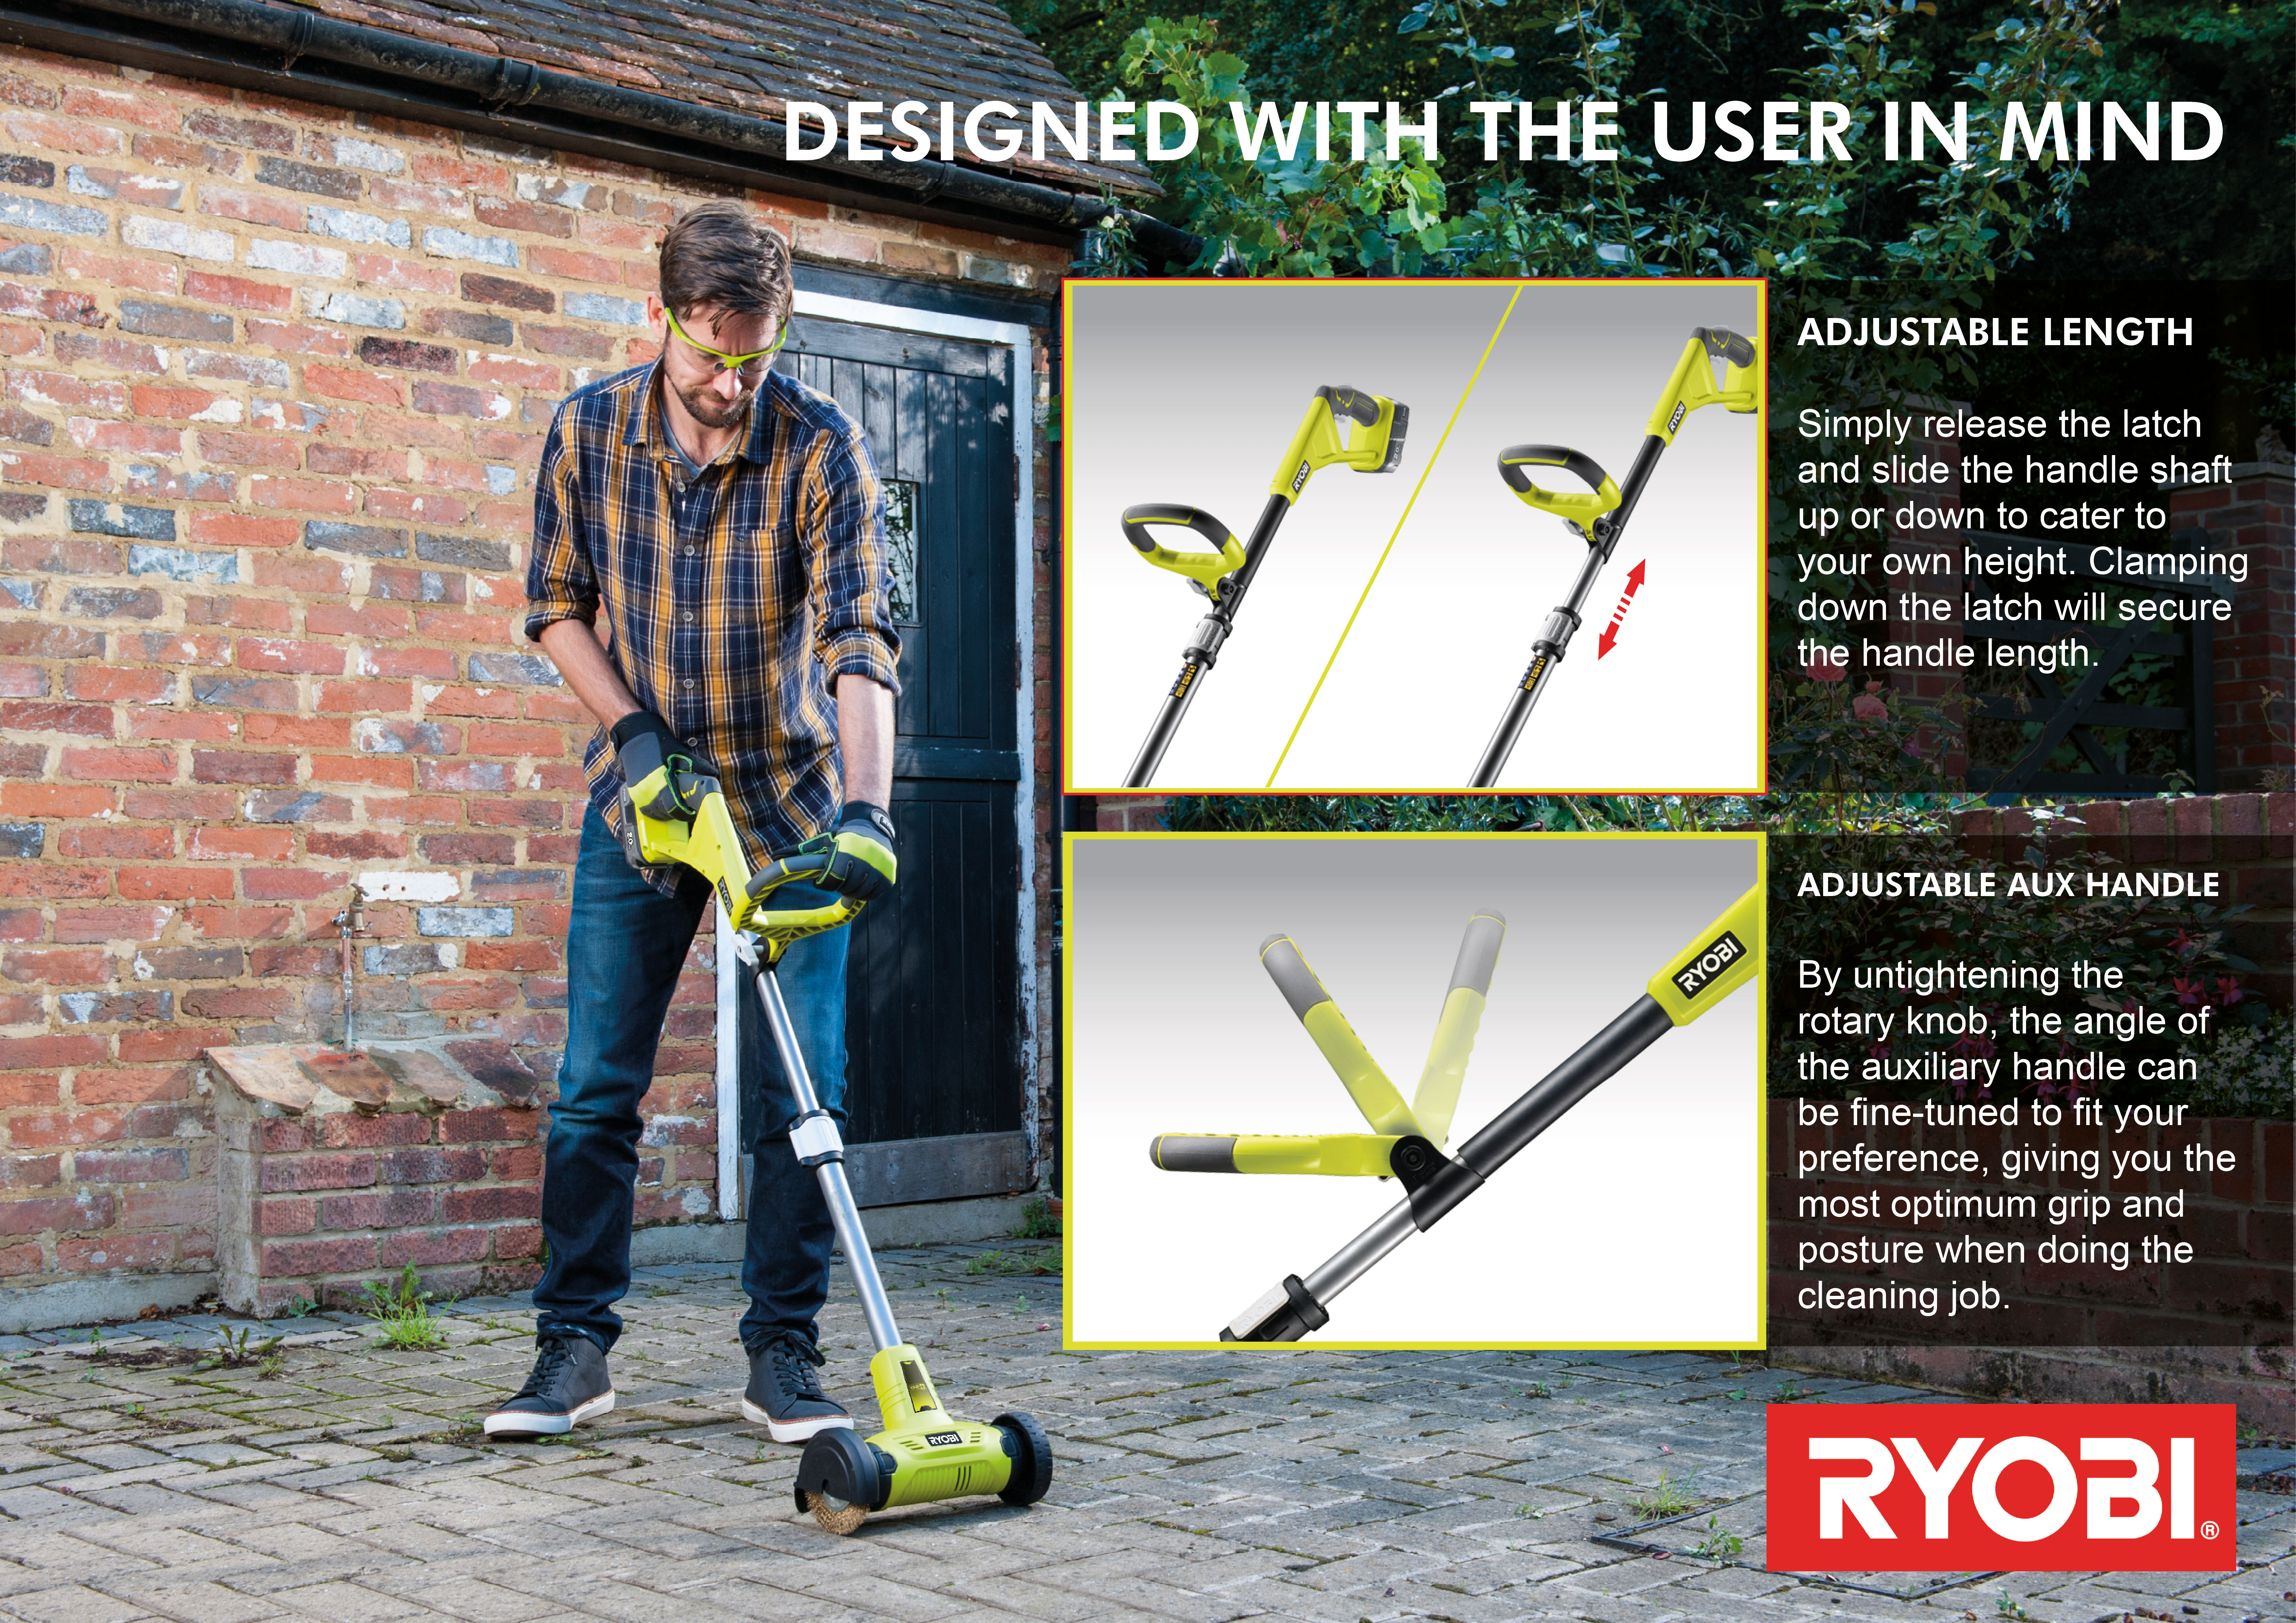 https://cdn.yournet.space/good-design.org/2019/2019%20Winners%20Images/Product%20Design/Hardware%20and%20Building/1724-Ryobi%2018v%20Cordless%20Patio%20Cleaner/PATIO%20CLEANER%20-%20DESIGN%2020190128-SLIDES2.jpg